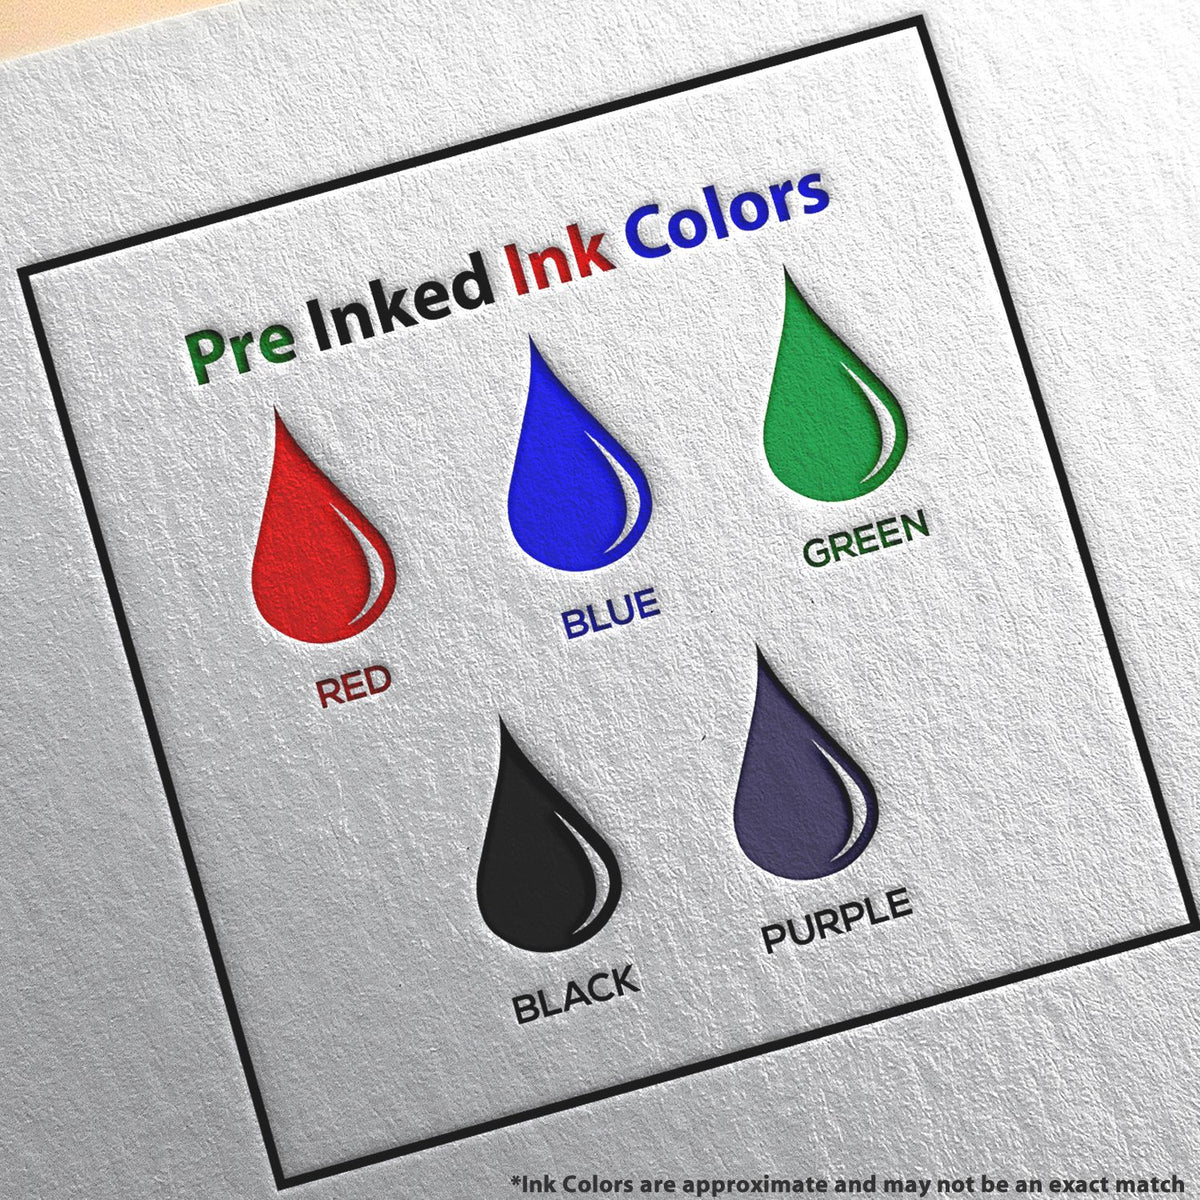 A picture showing the different ink colors or hues available for the Super Slim Florida Notary Public Stamp product.